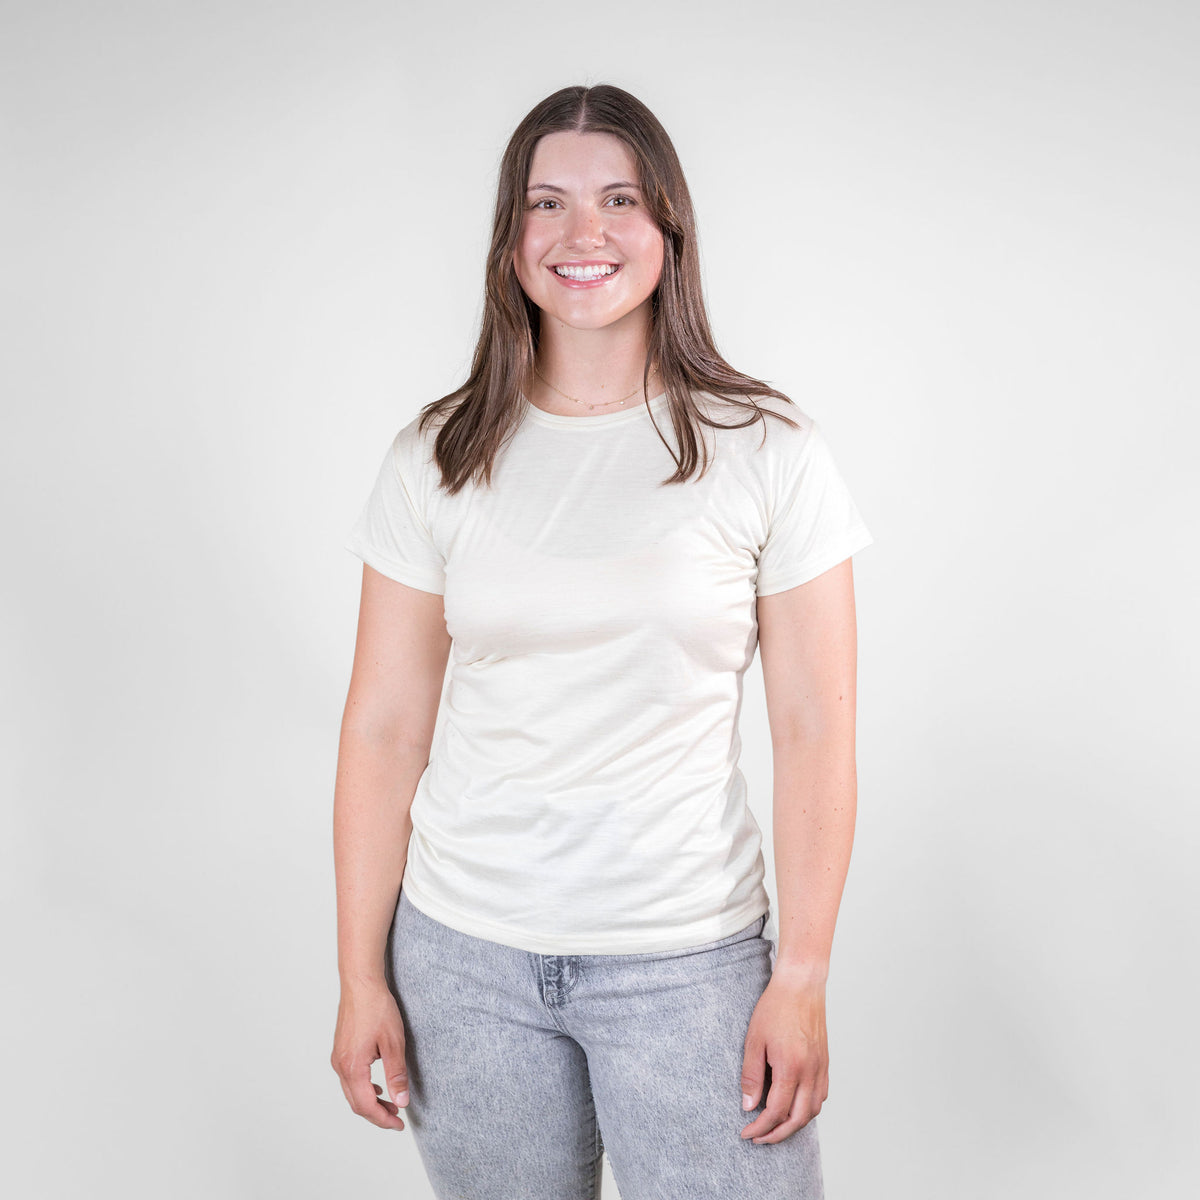 A smiling brown haired woman standing against a white background. She is wearing gray jeans and a natural white Alpacas of Montana lightweight athletic activewear outerwear breathable moisture wicking antimicrobial soft comfortable exercise short sleeve alpaca women&#39;s performance tee for running sports exercise work out hiking climbing camping biking